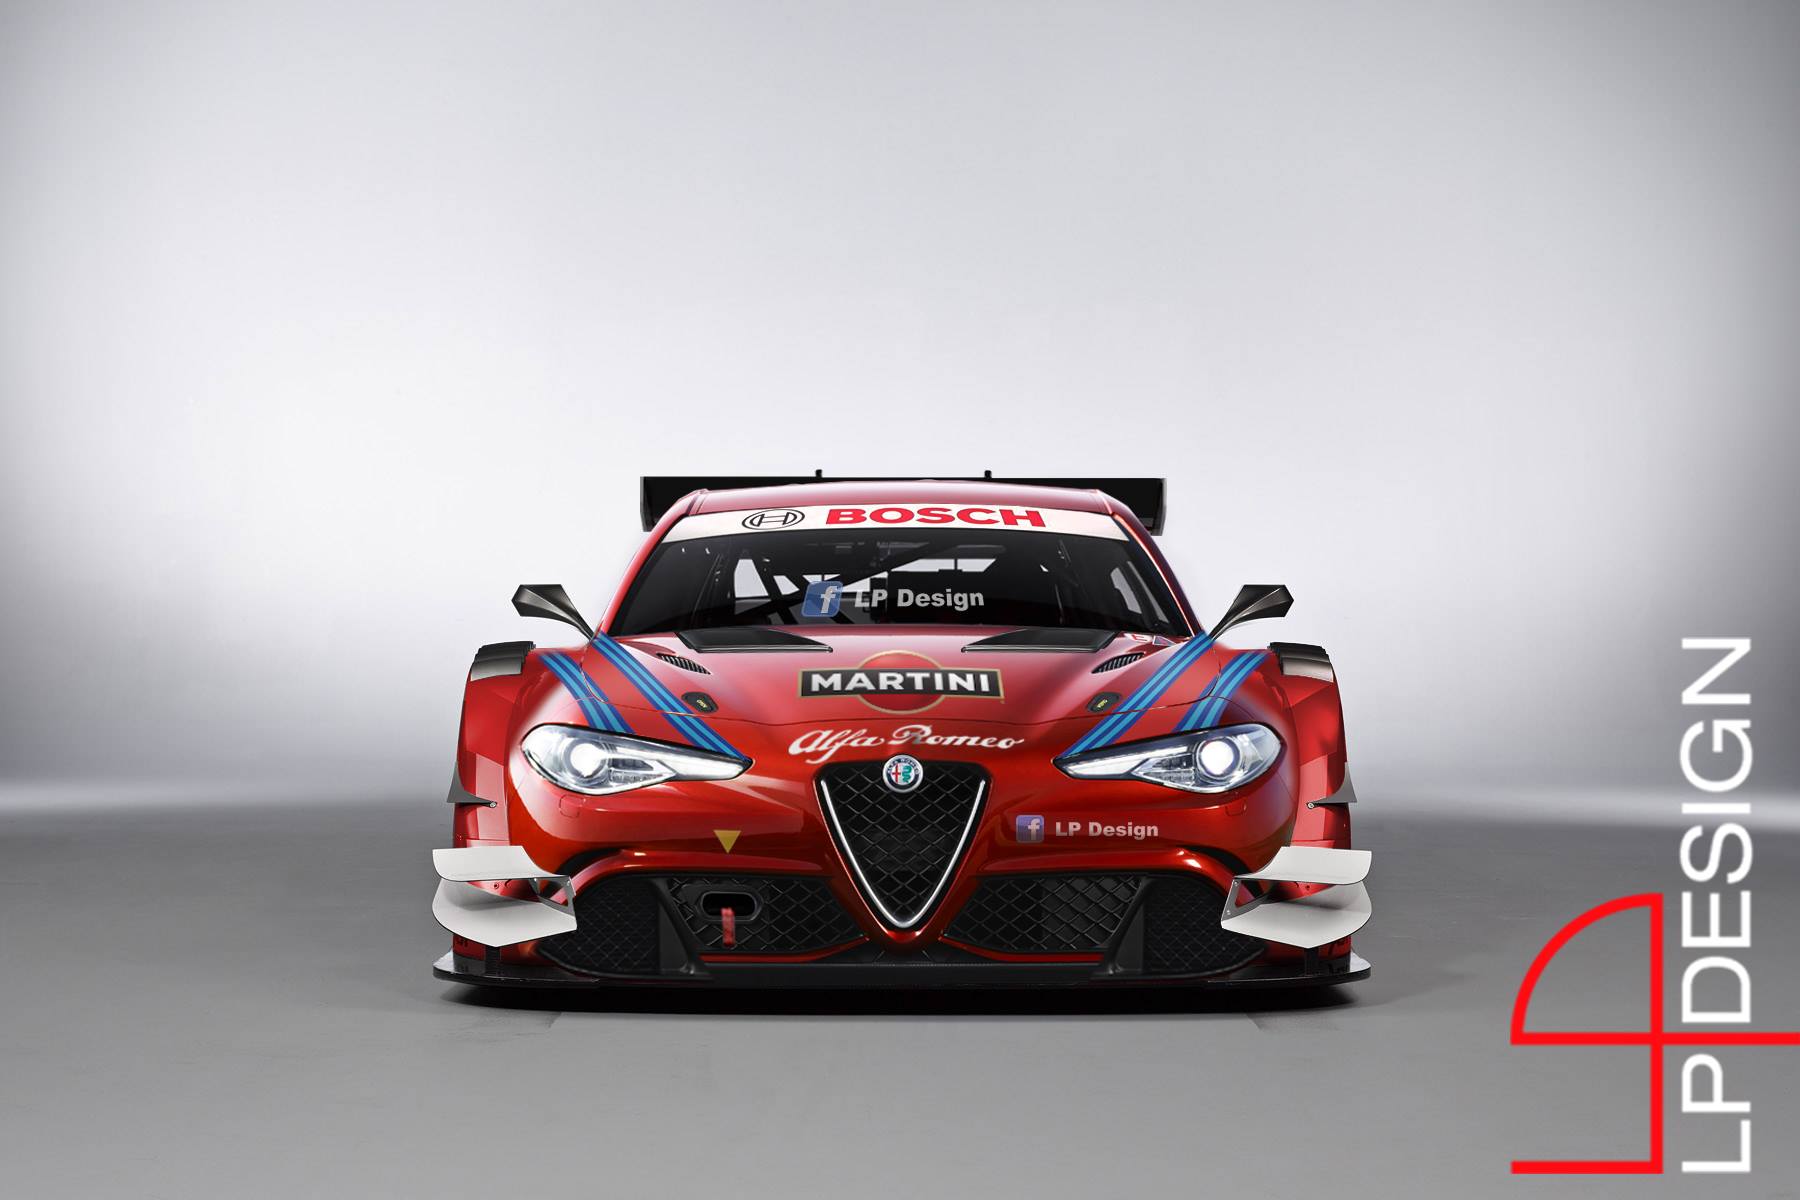 alfa romeo giulia receives dtm racing suit the beauty just turned into beast 97974_1